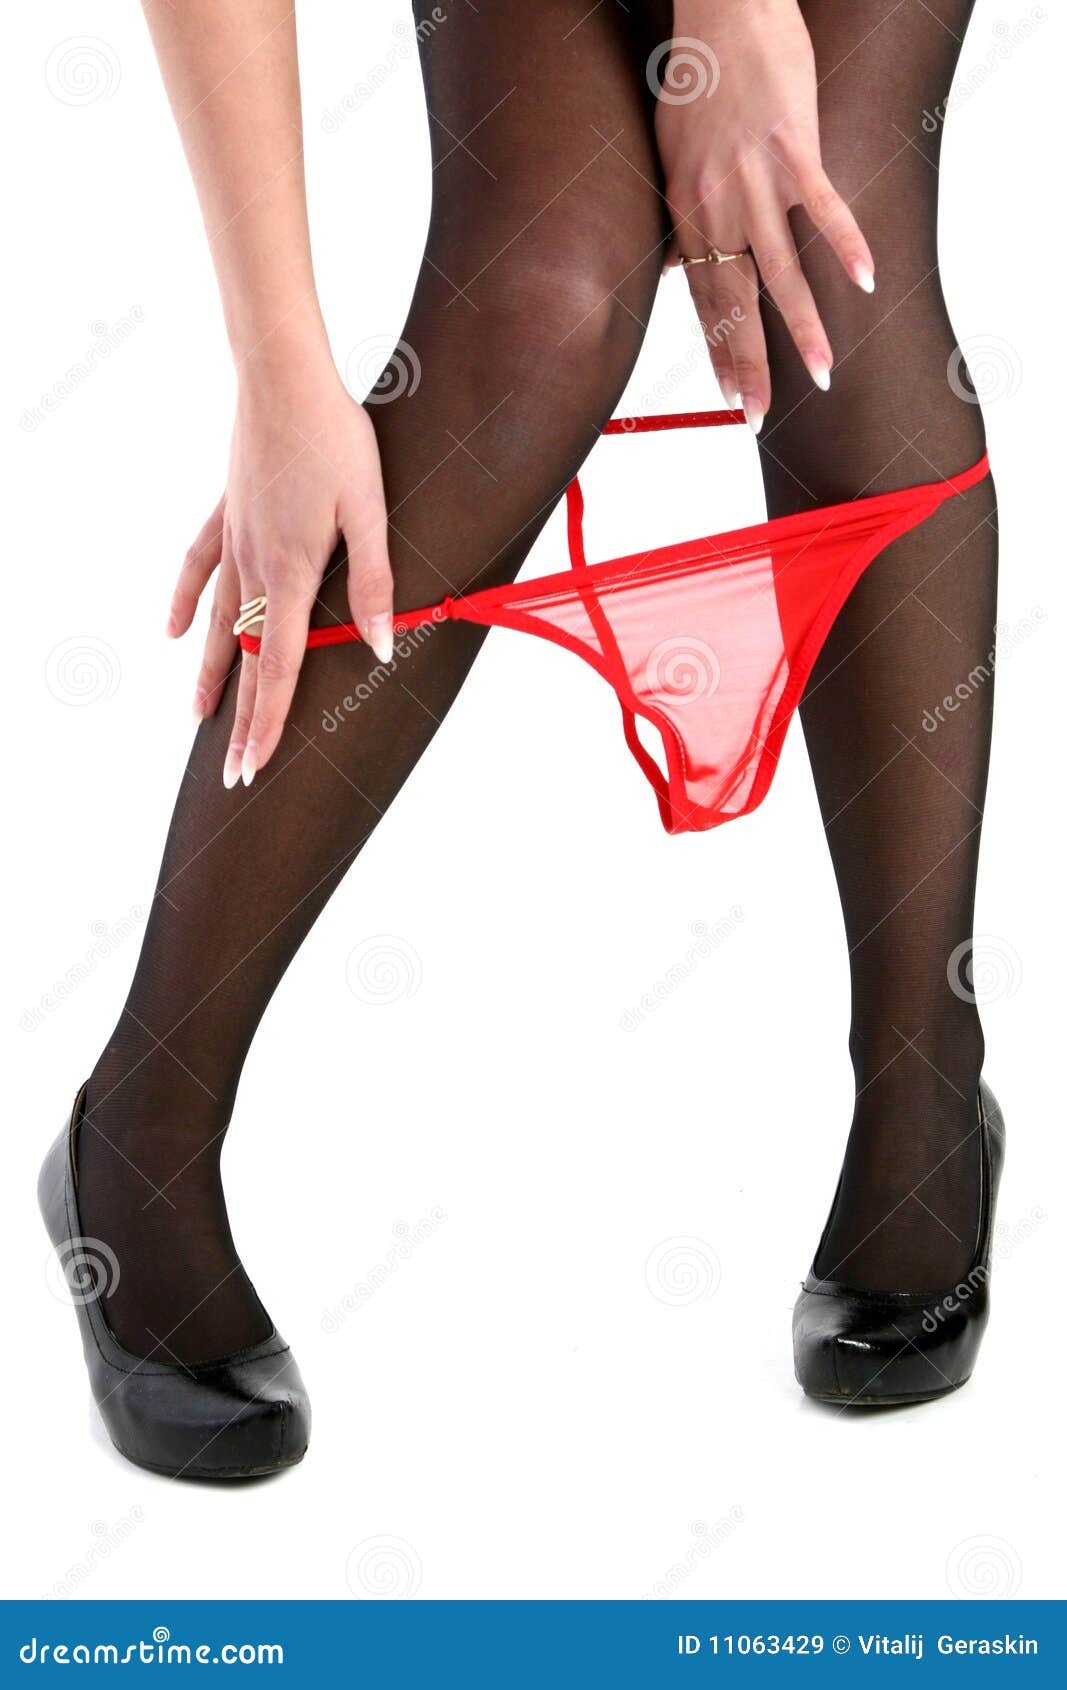 Legs of a Young Woman while Undress Panties. Stock Image - Image